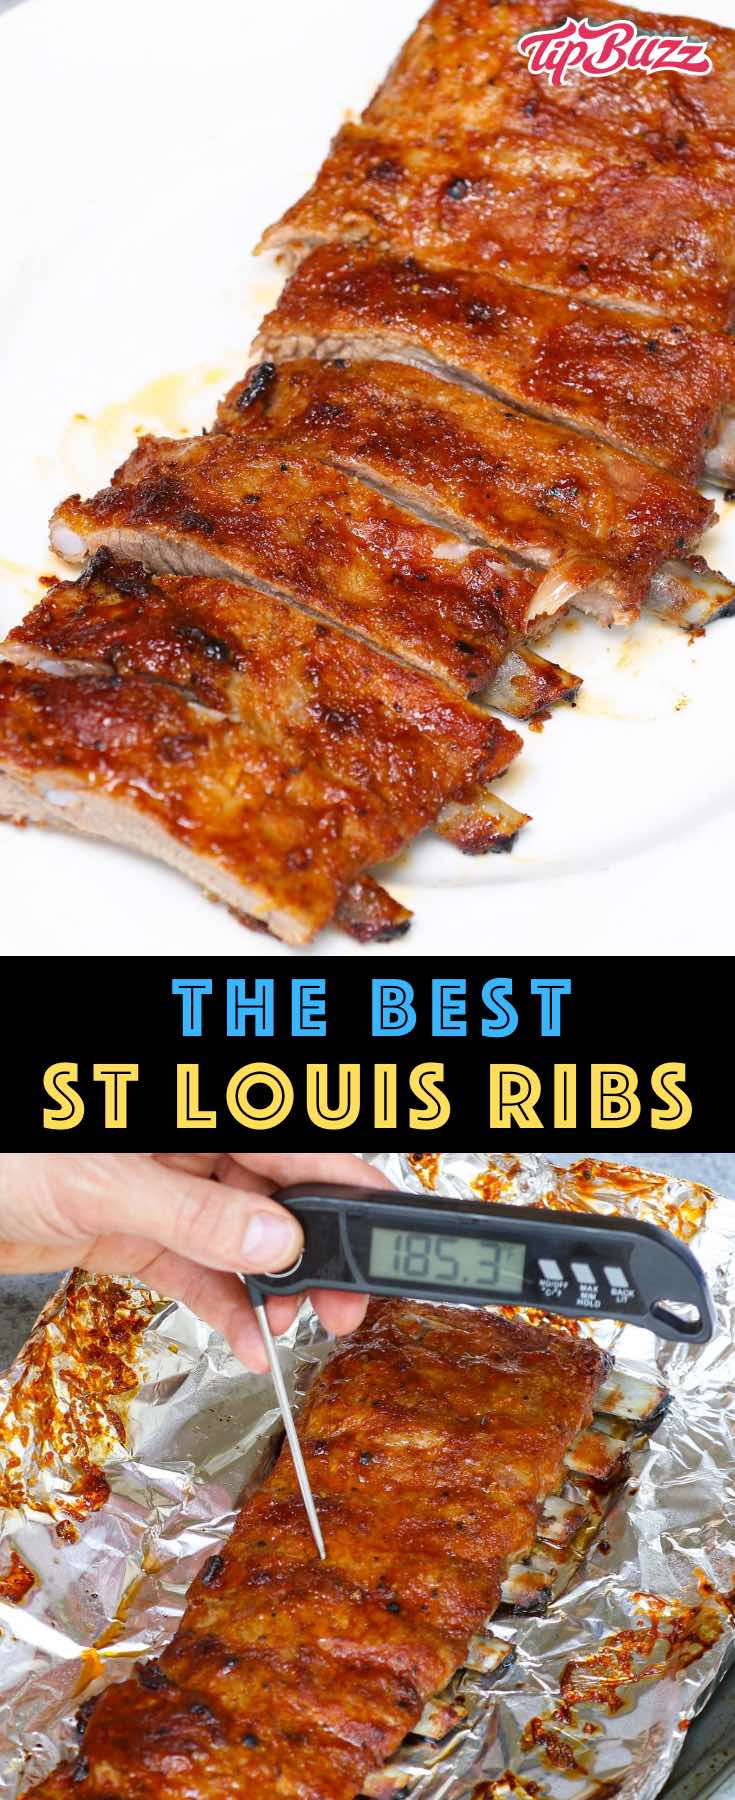 Enjoy fall-off-the-bone tender St Louis Style Ribs baked in the oven with a caramelized, sticky crust! This is one of the best ways to make St Louis ribs. #stlouisribs